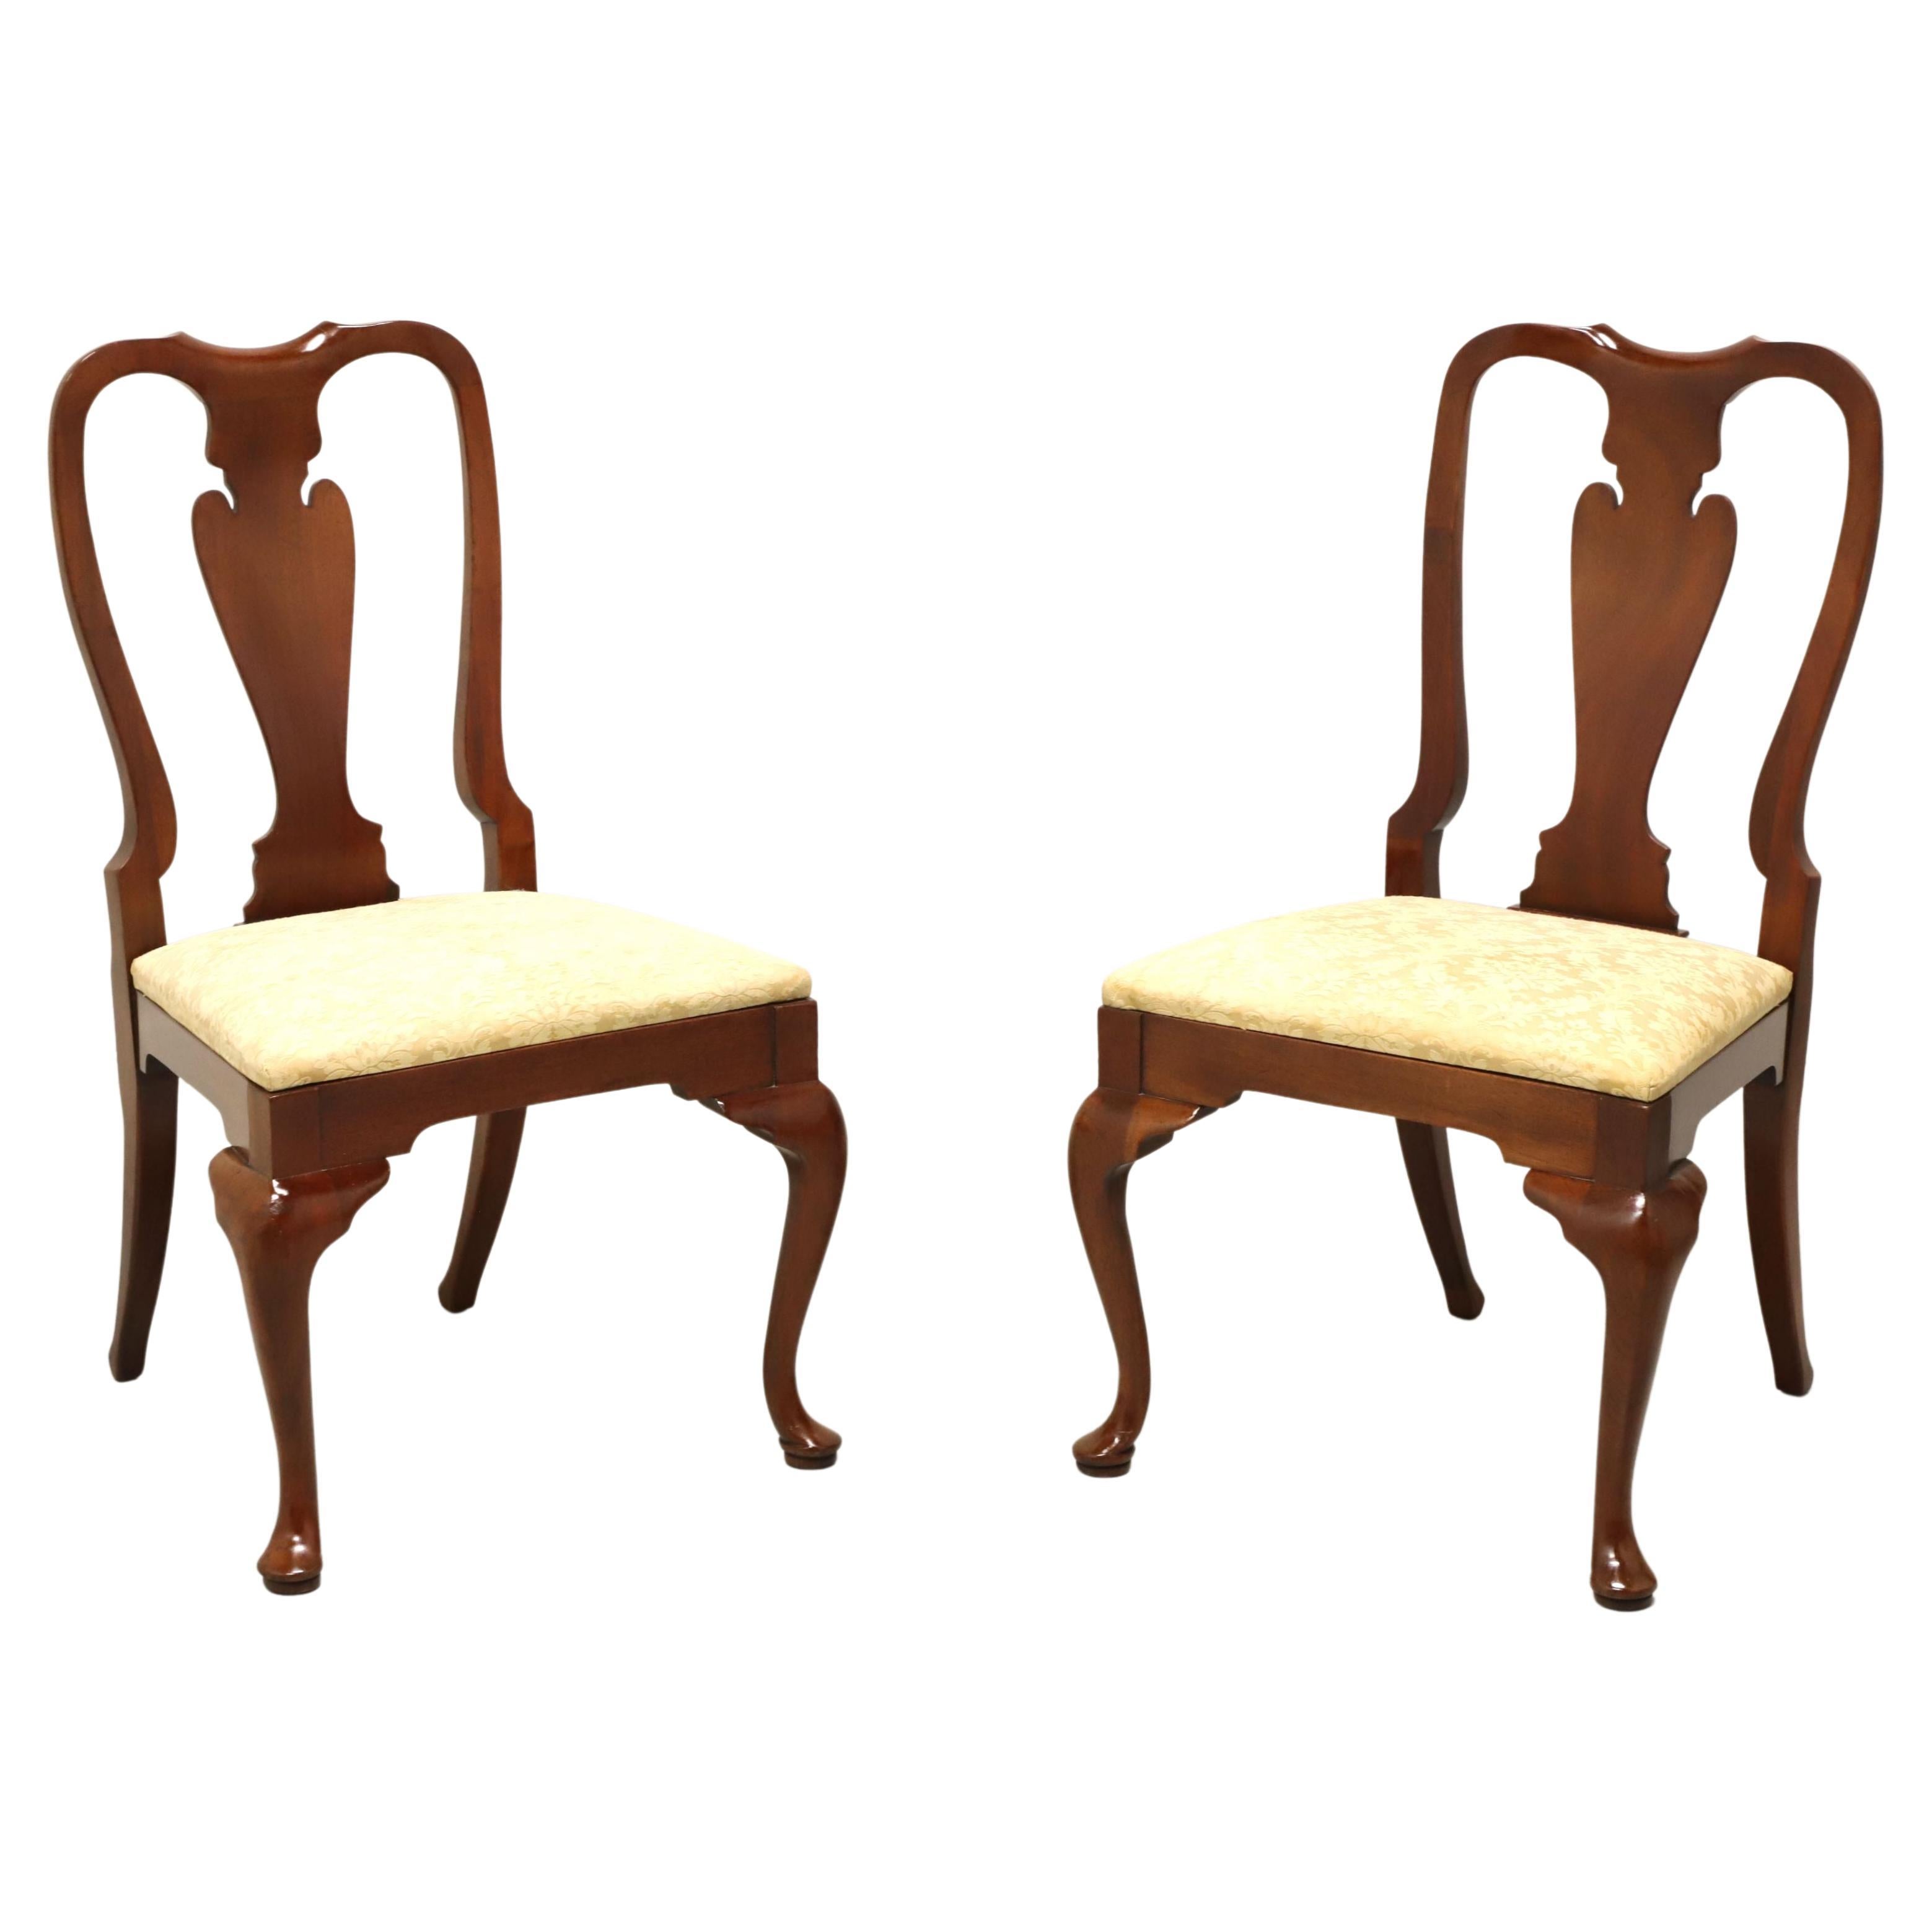 HICKORY CHAIR Amber Mahogany Queen Anne Dining Side Chairs - Pair A